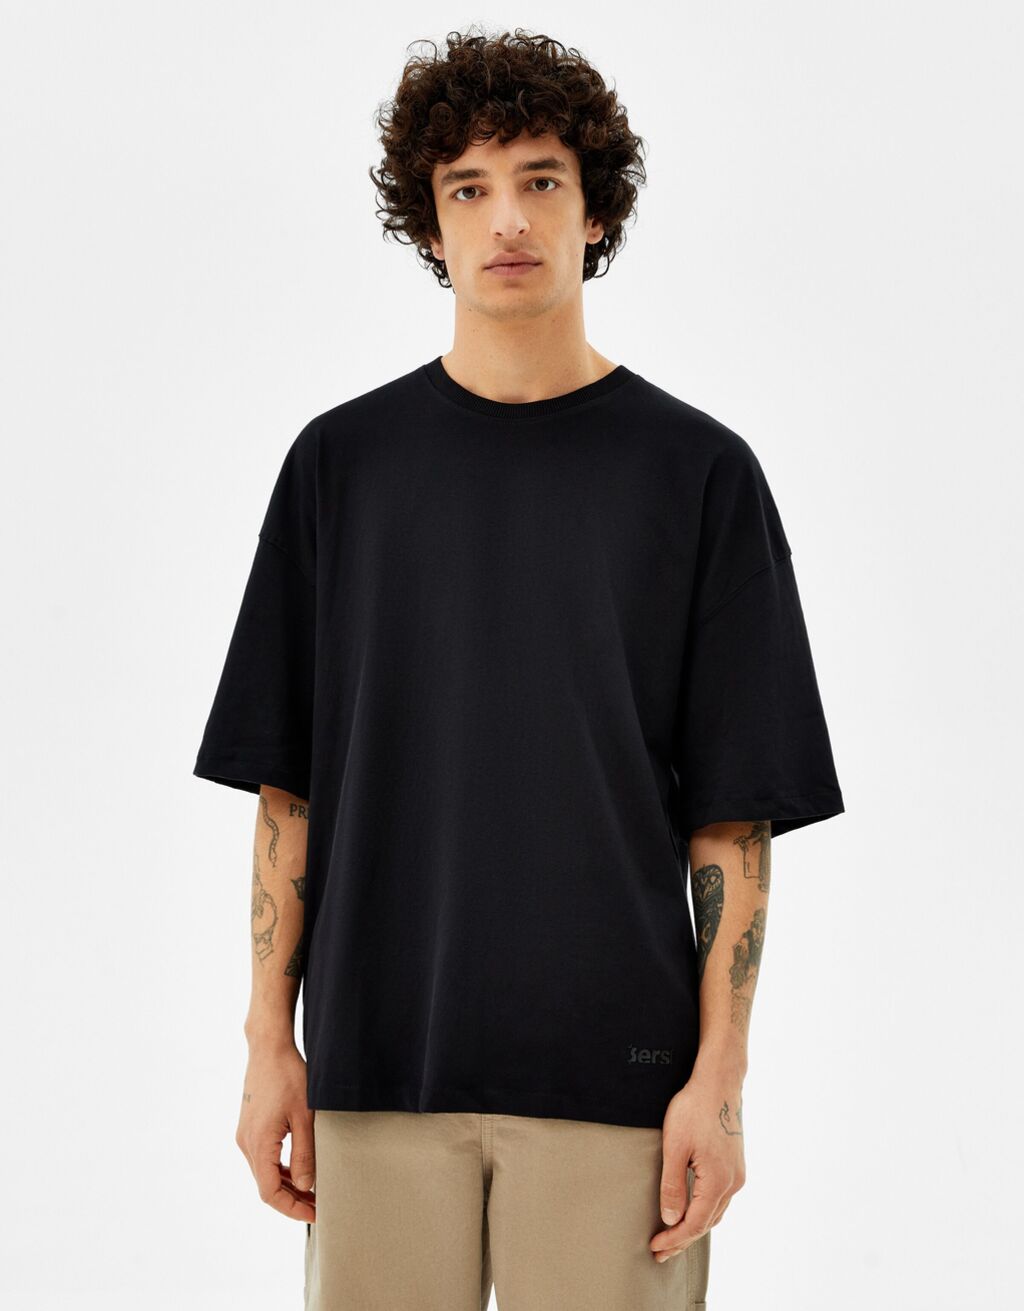 Extra loose fit short sleeve T-shirt